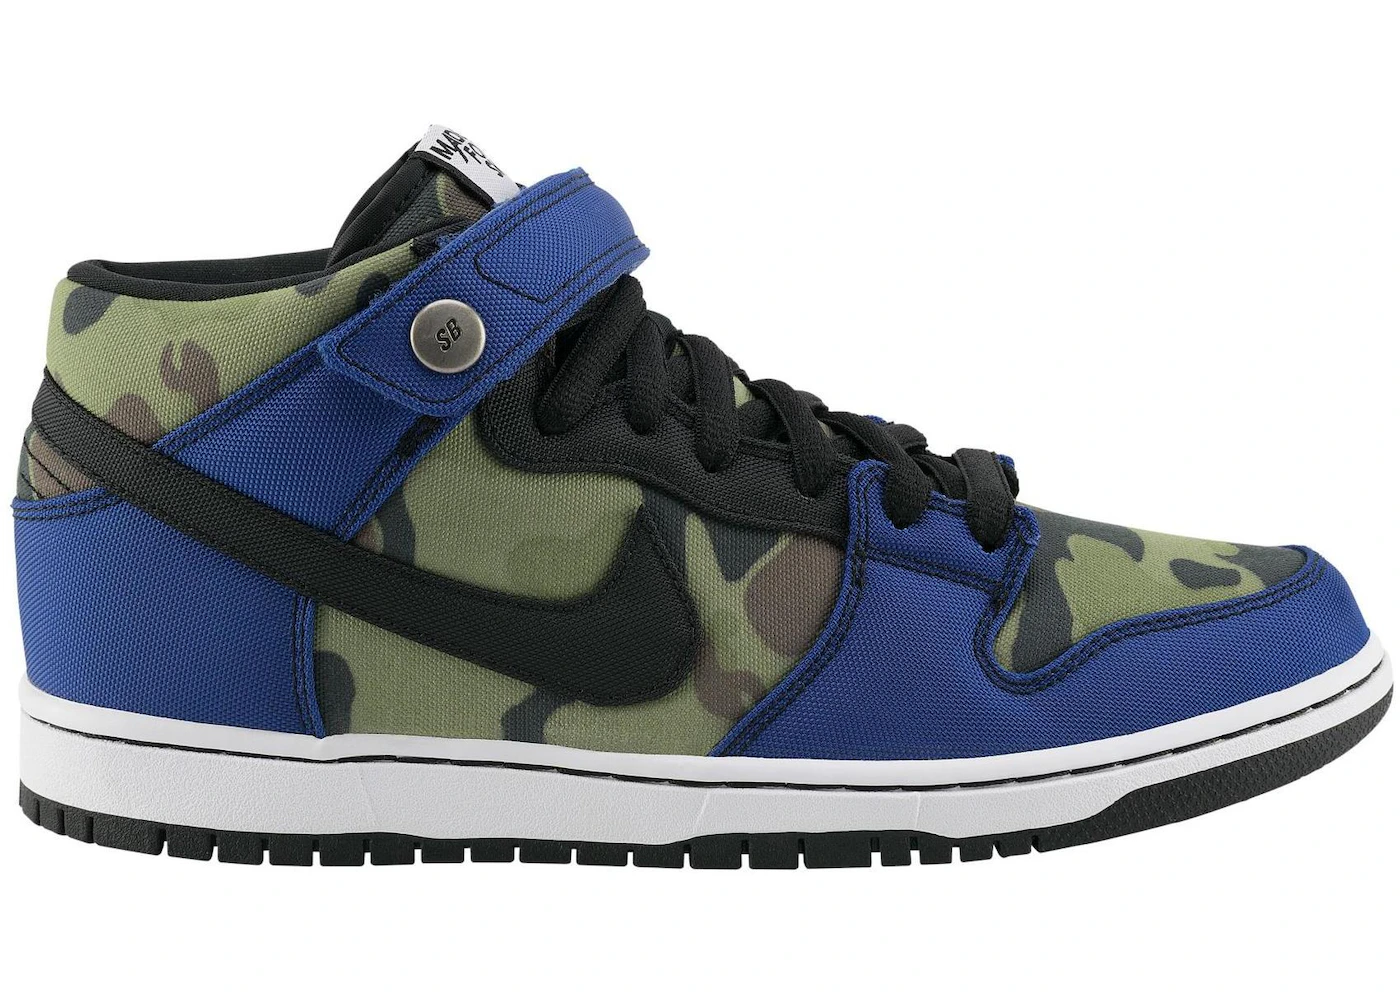 Nike SB Dunk nike sb shoes mid Mid Made for Skate